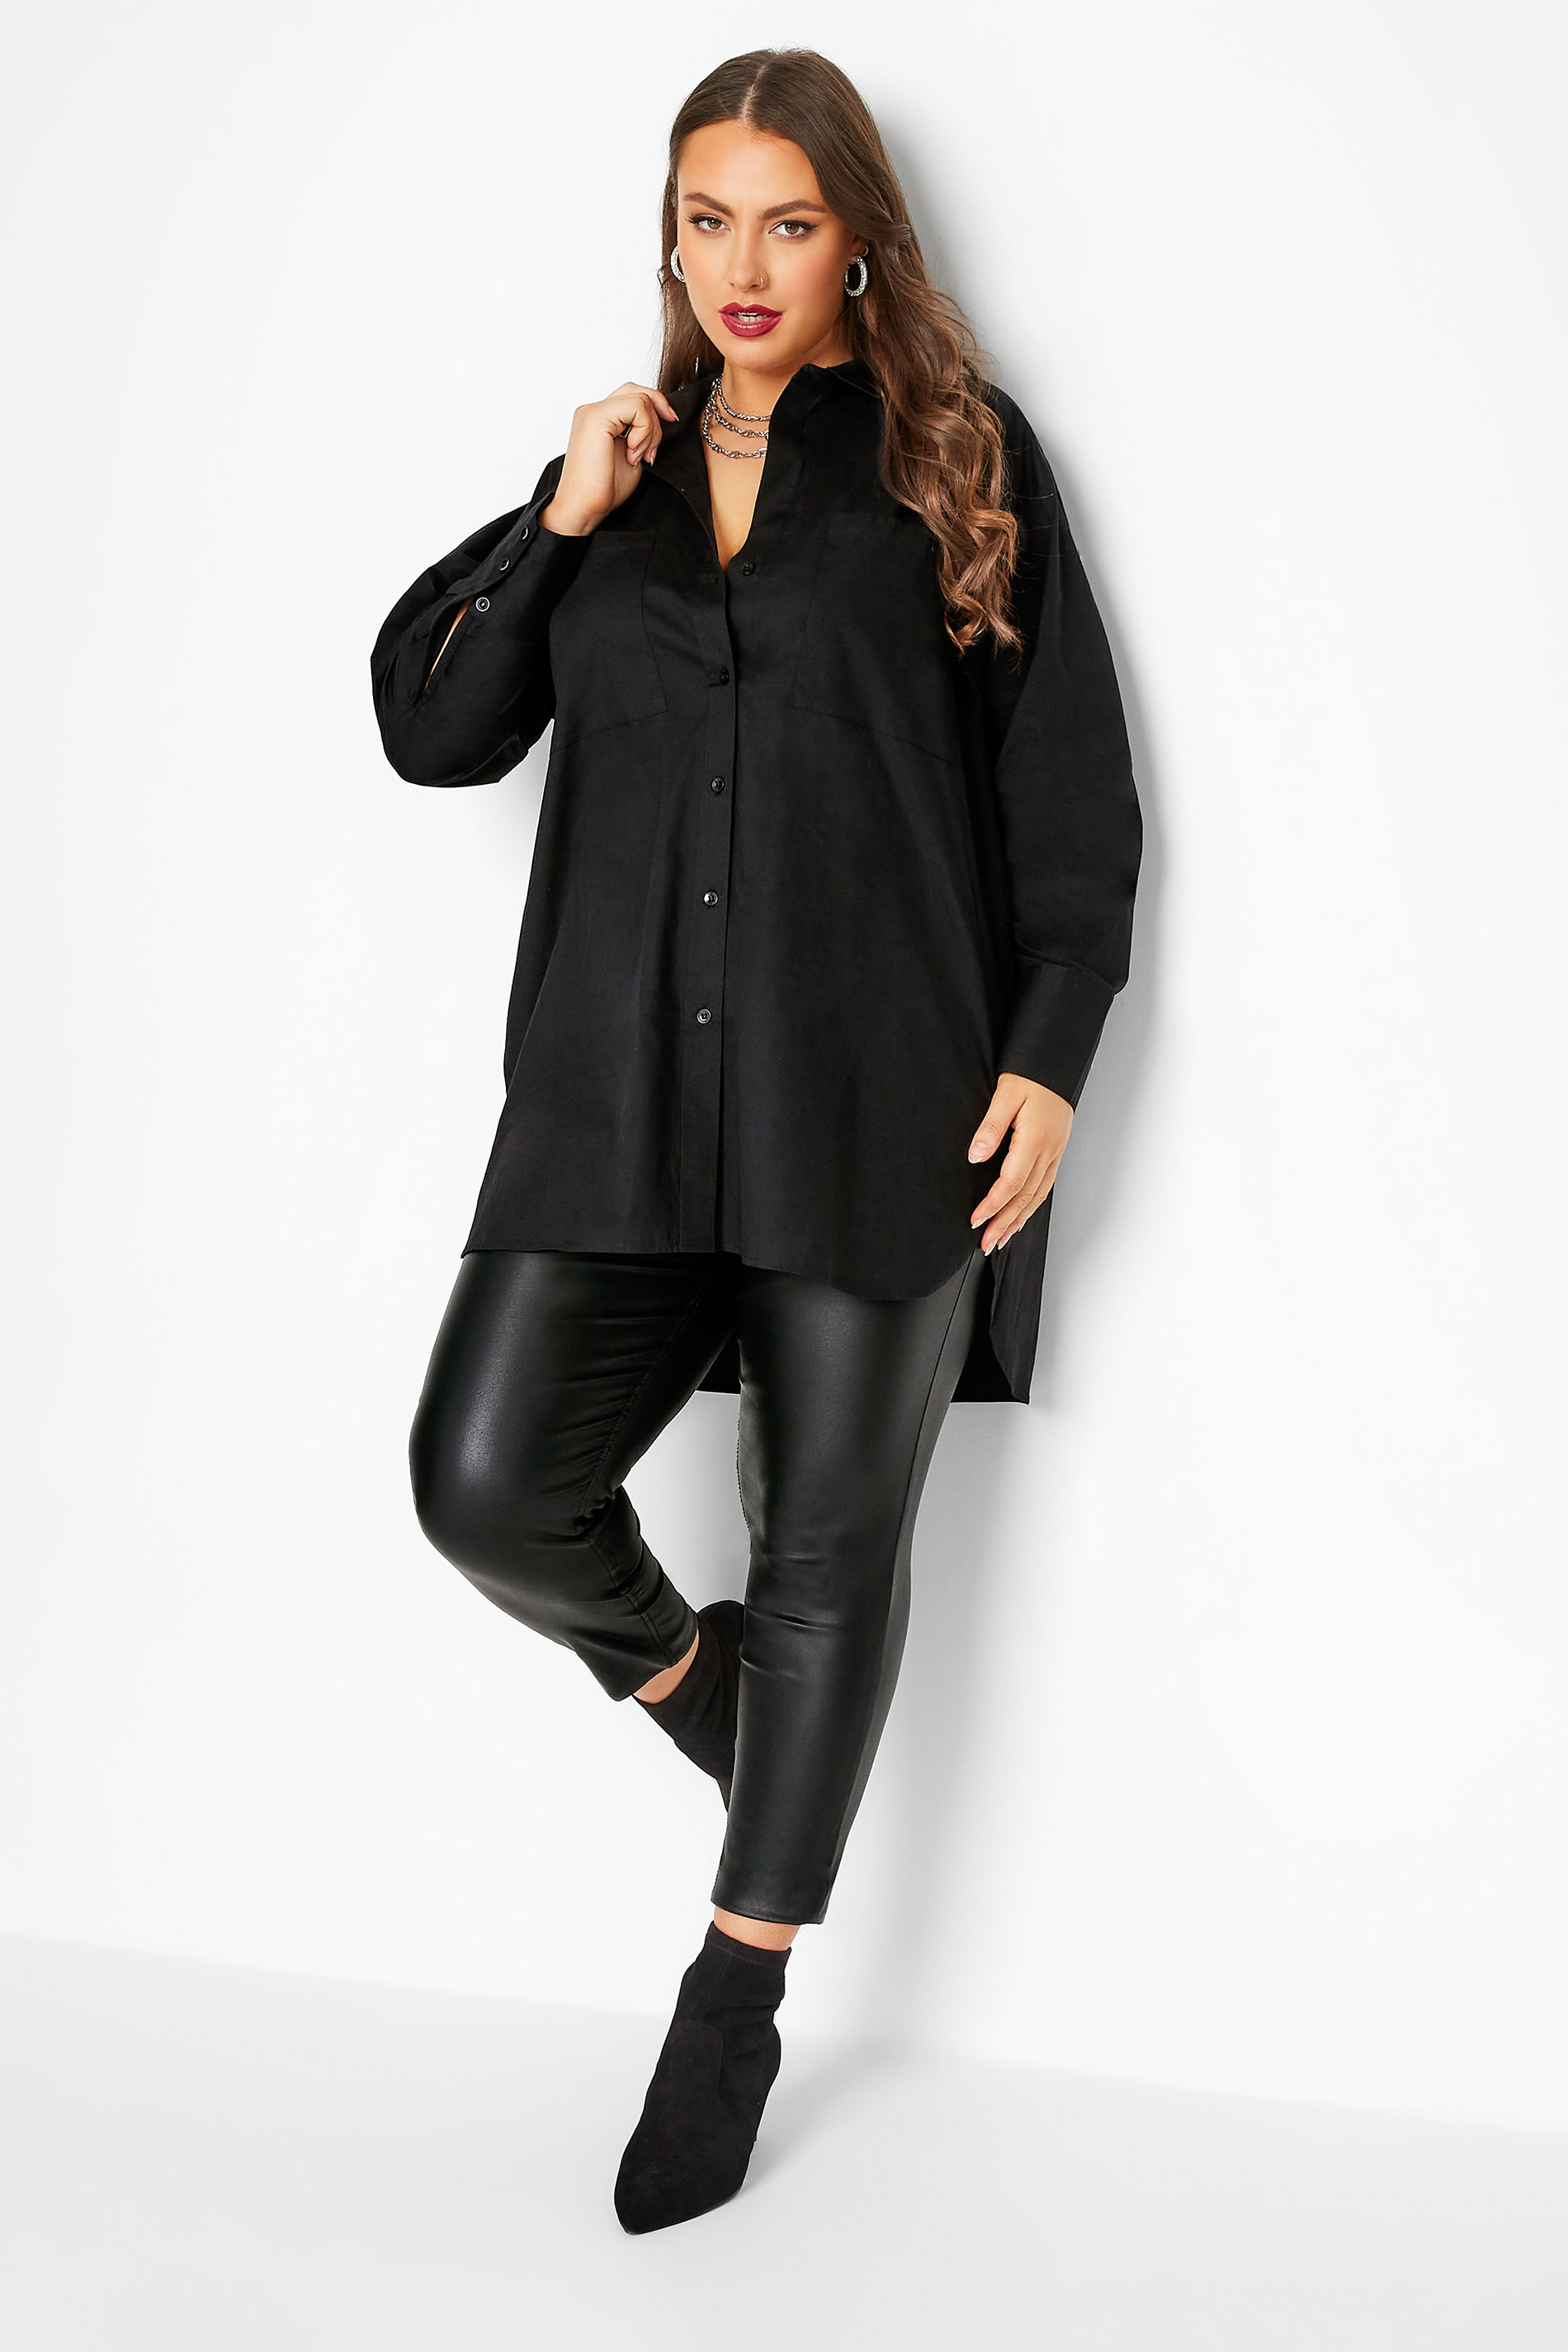 LIMITED COLLECTION Curve Black Oversized Boyfriend Shirt | Yours Clothing 2